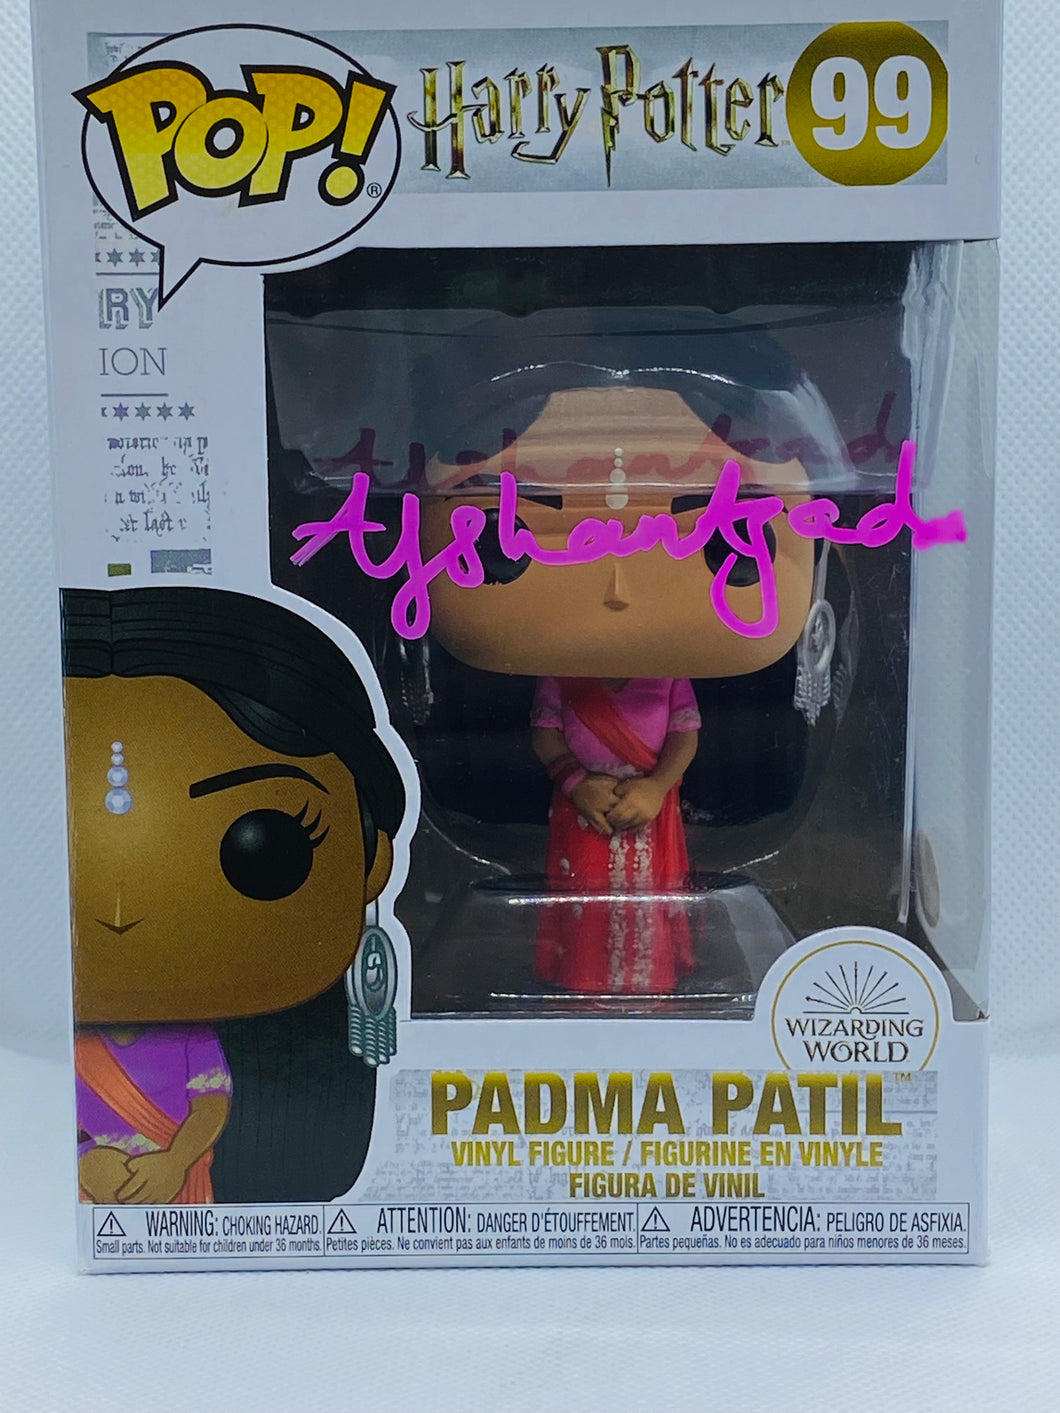 Padma Patil 99 Harry potter Funko Pop signed by Afshan Azad